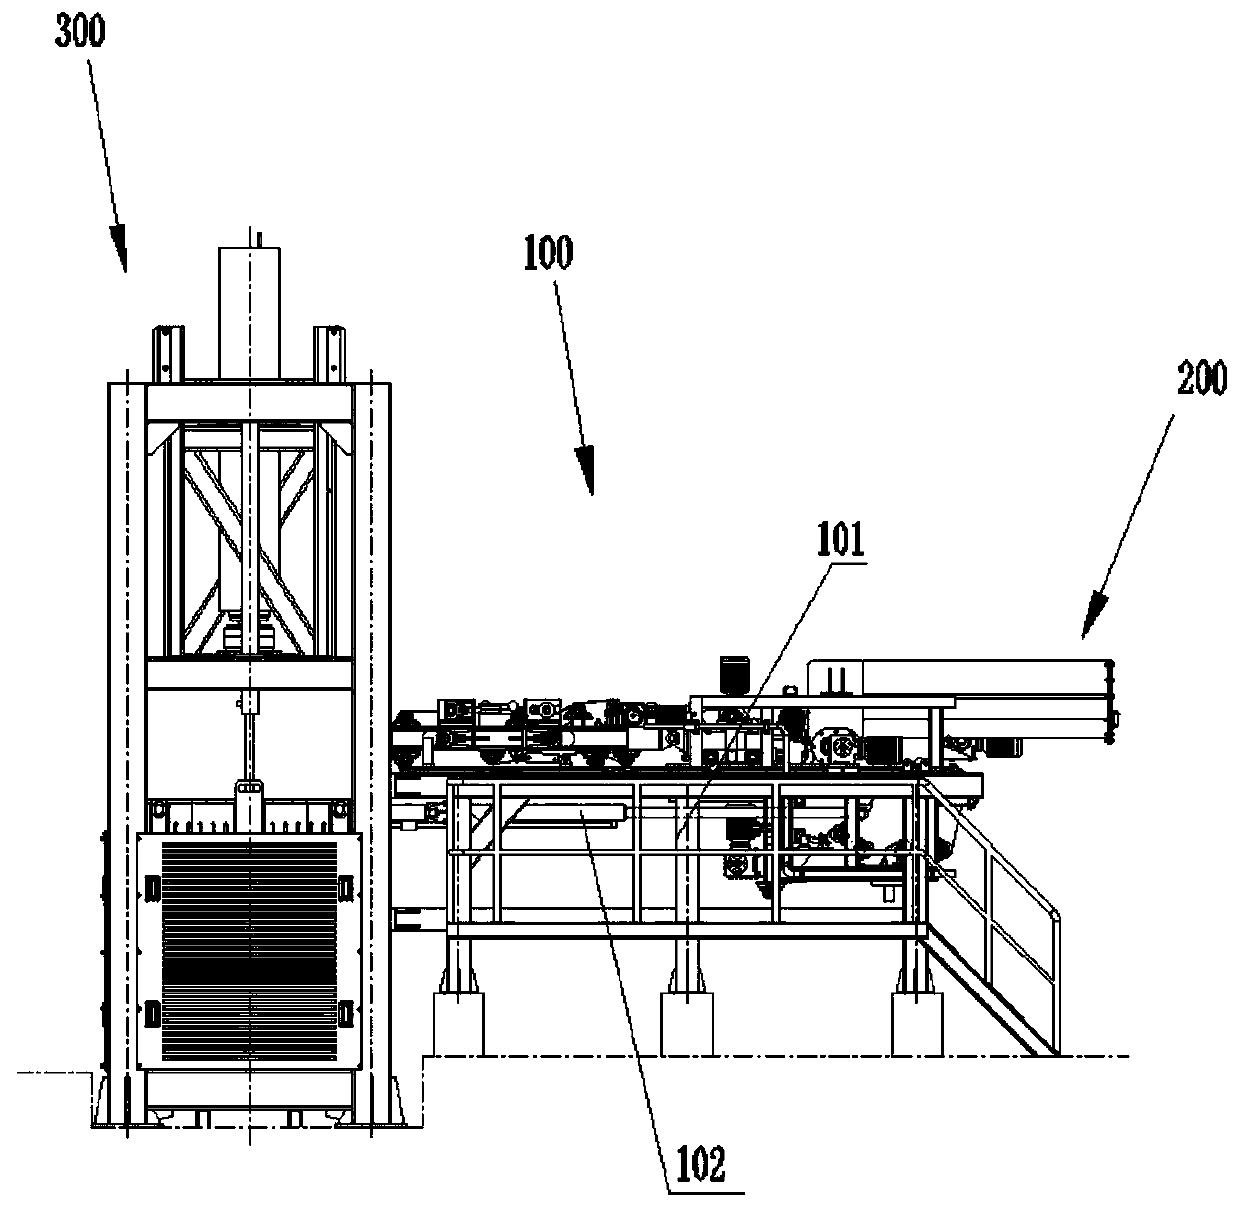 Laminated filter pressing device